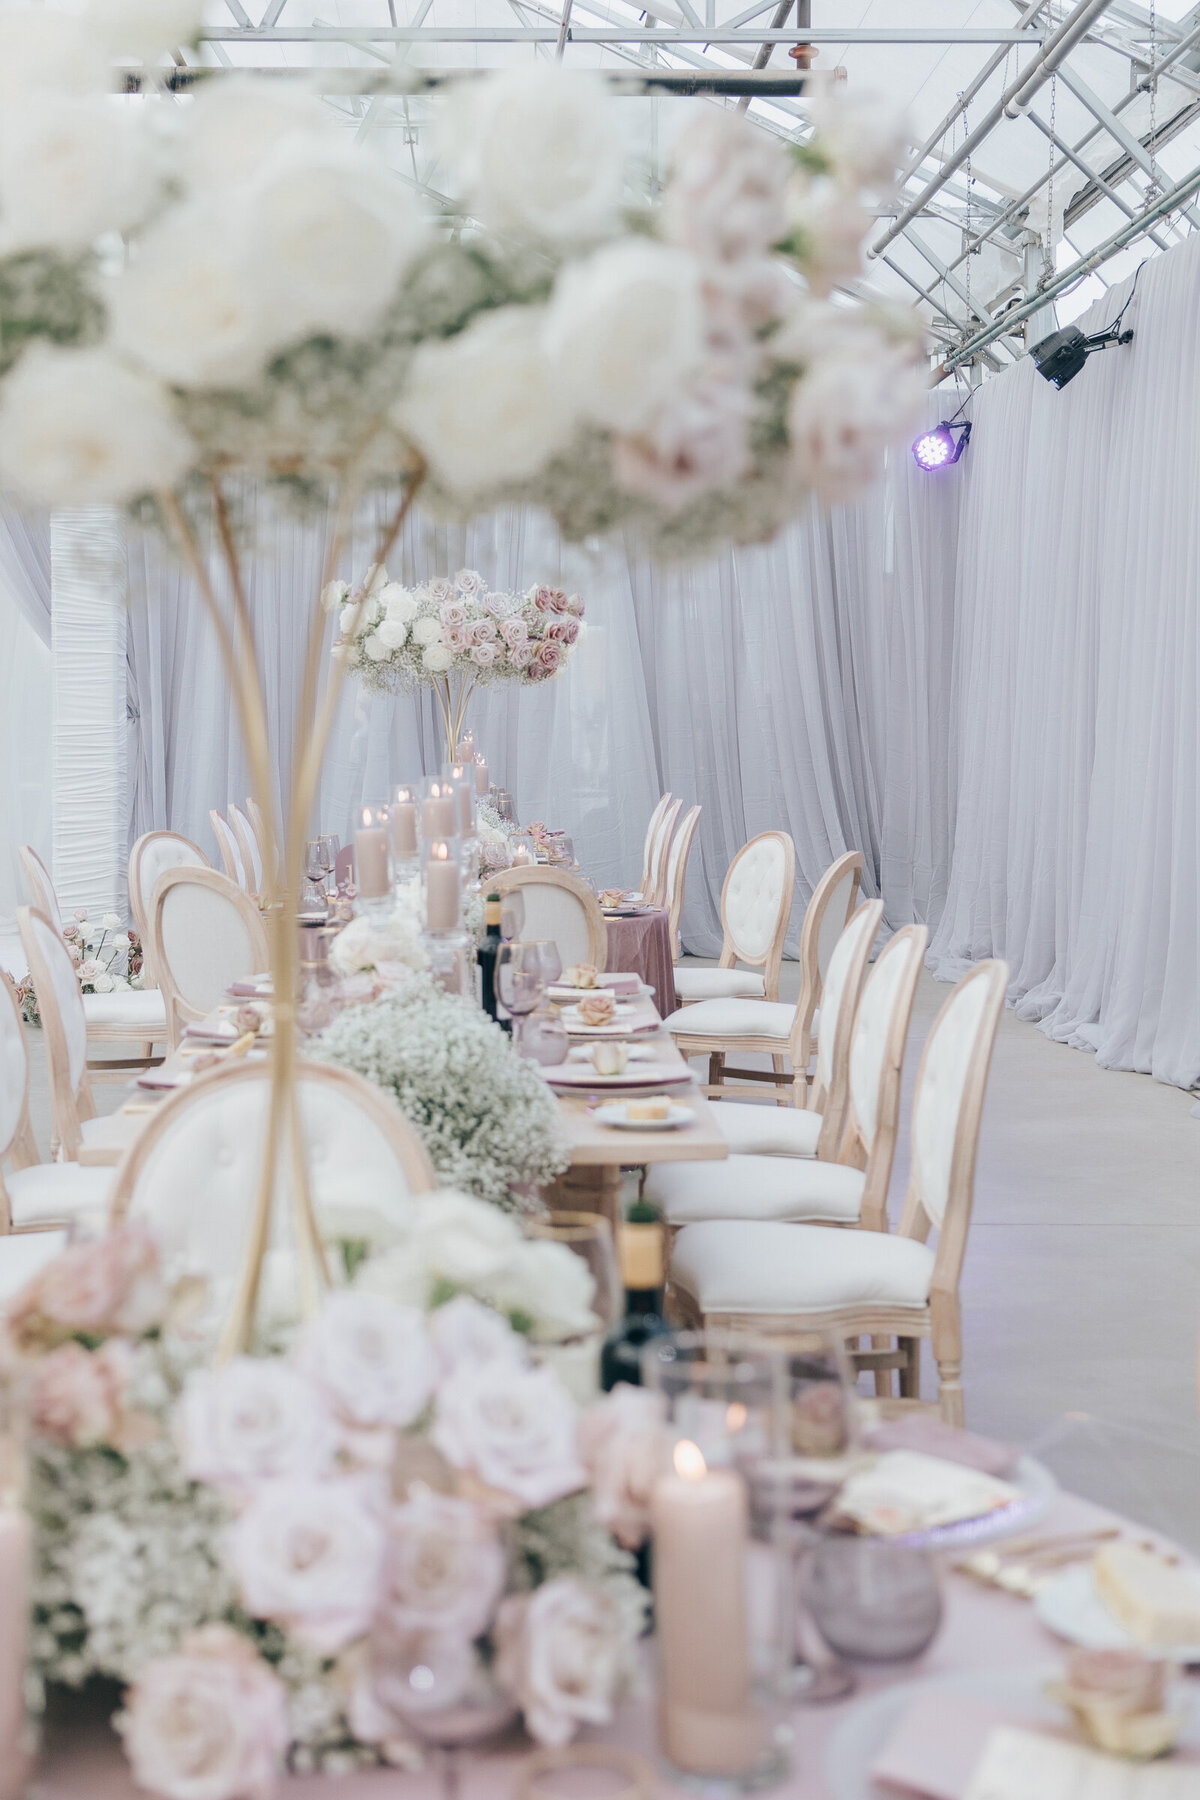 Elegant wedding dinner with roses and baby's breath at Twelfth Night Events